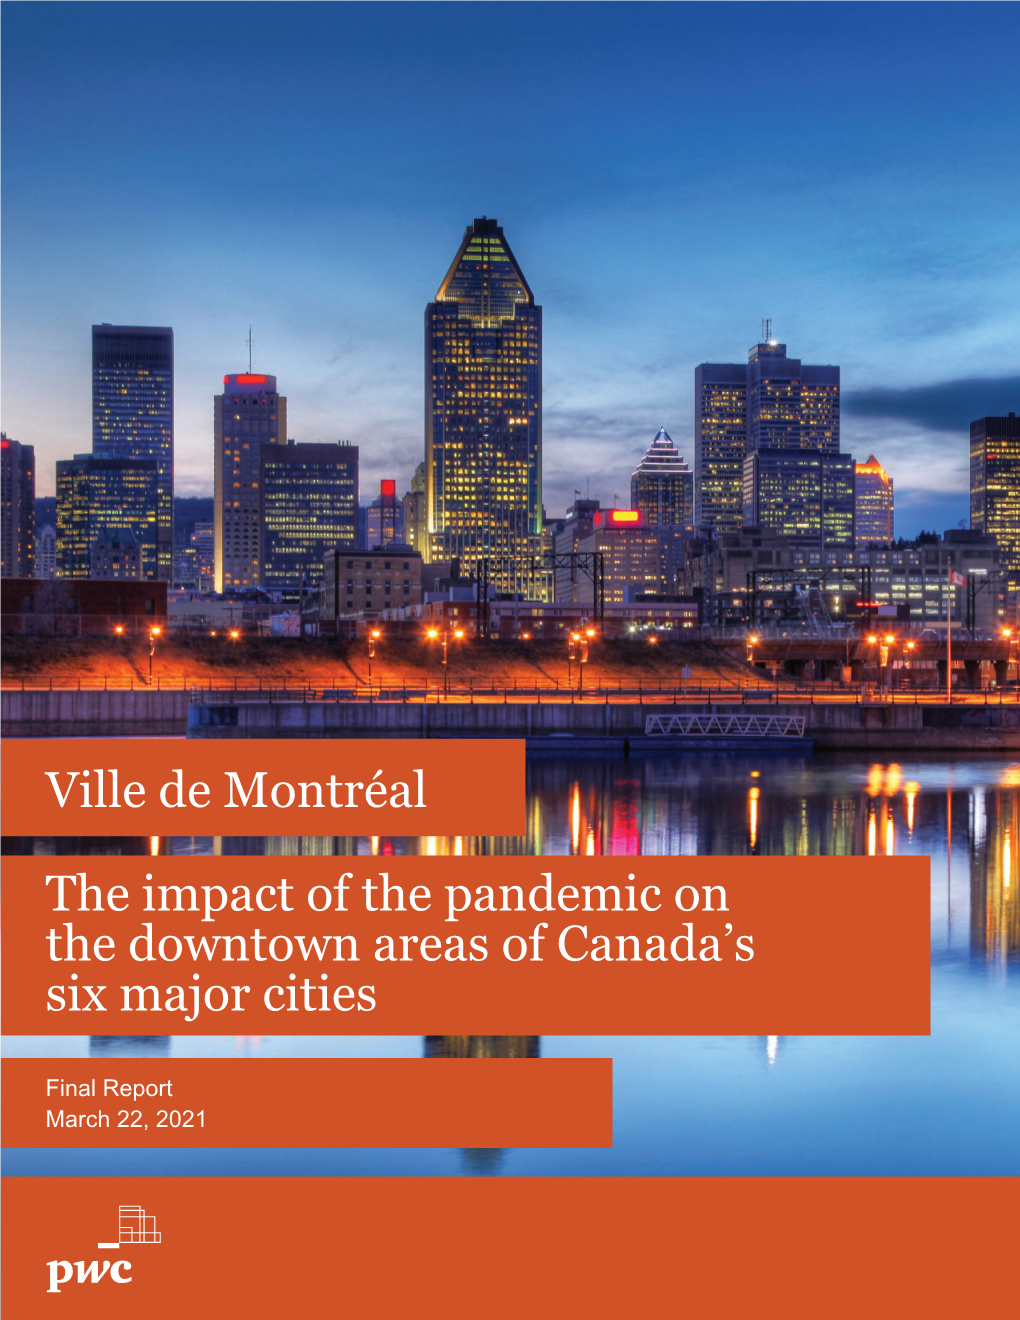 Ville De Montréal the Impact of the Pandemic on the Downtown Areas of Canada's Six Major Cities